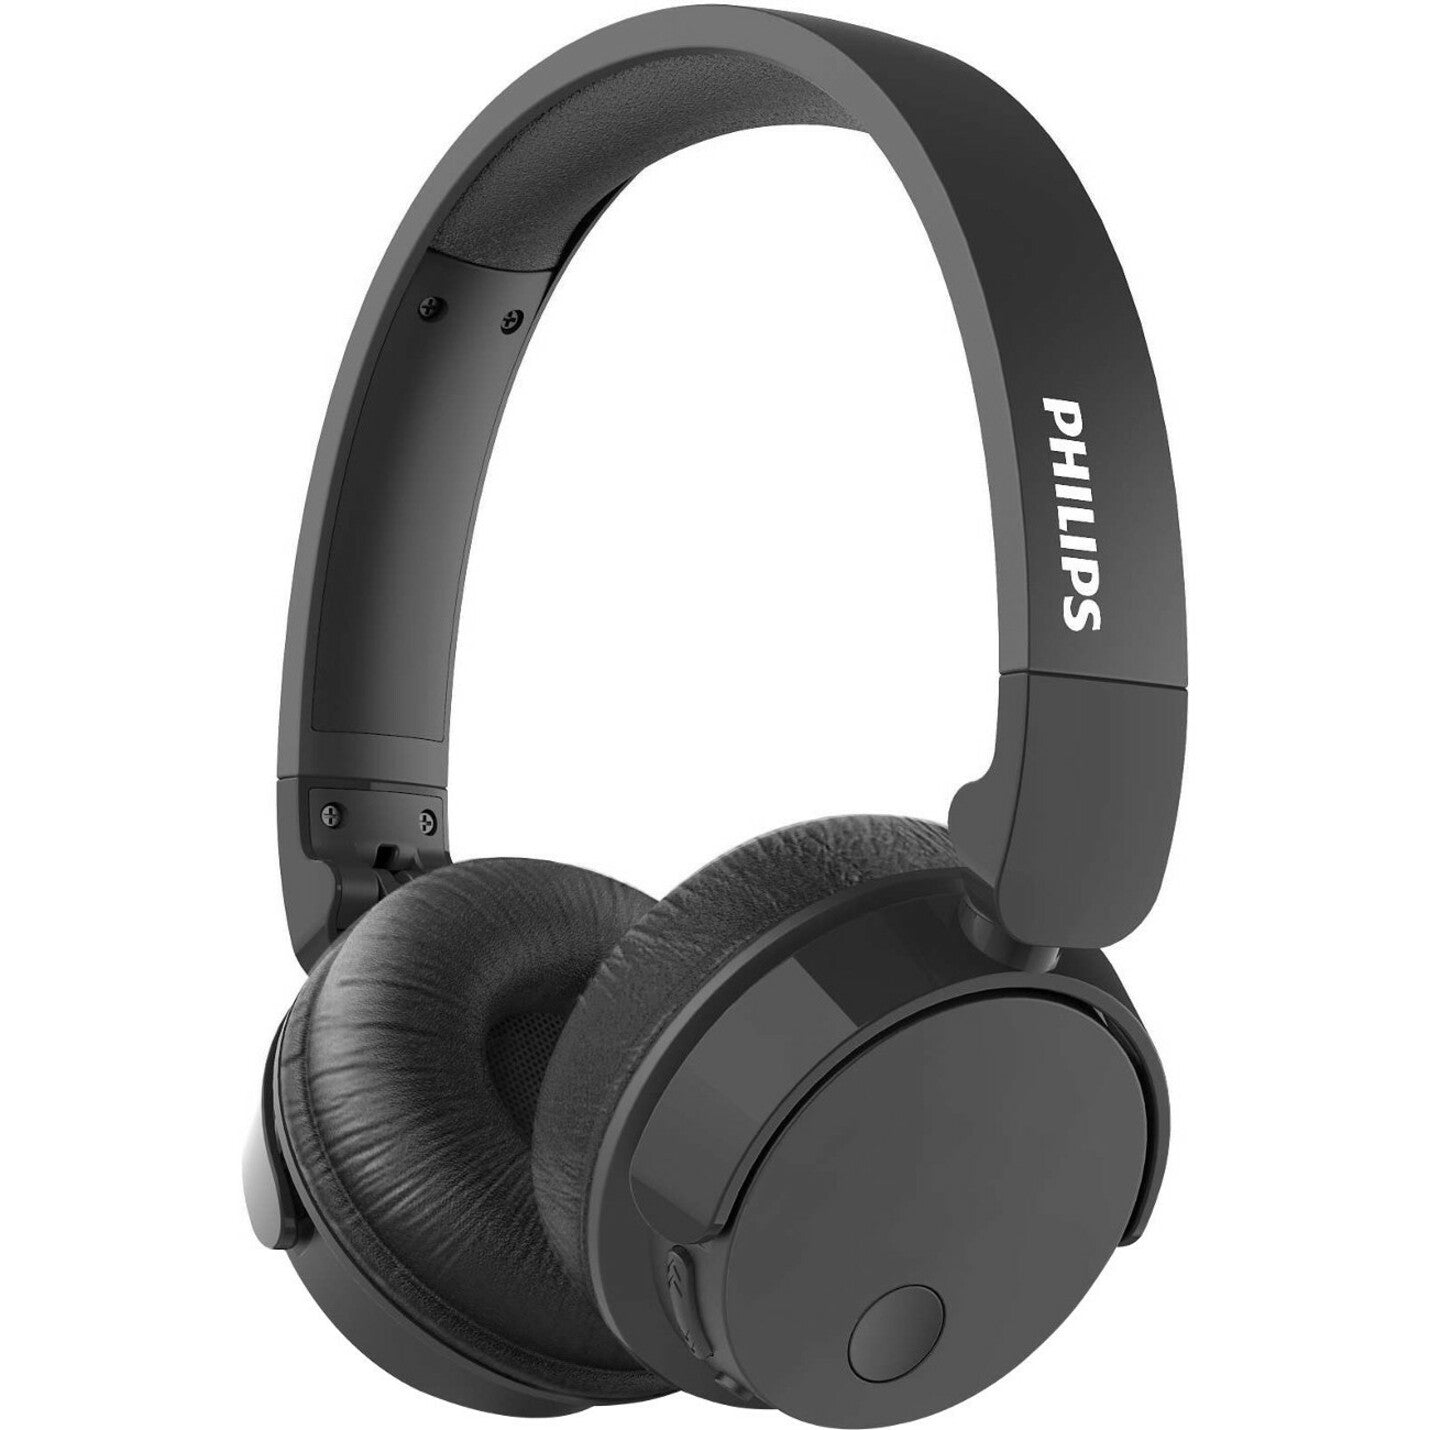 Philips BASS+ Wireless Headphone - Powerful Bass and Wireless Convenience [Discontinued]